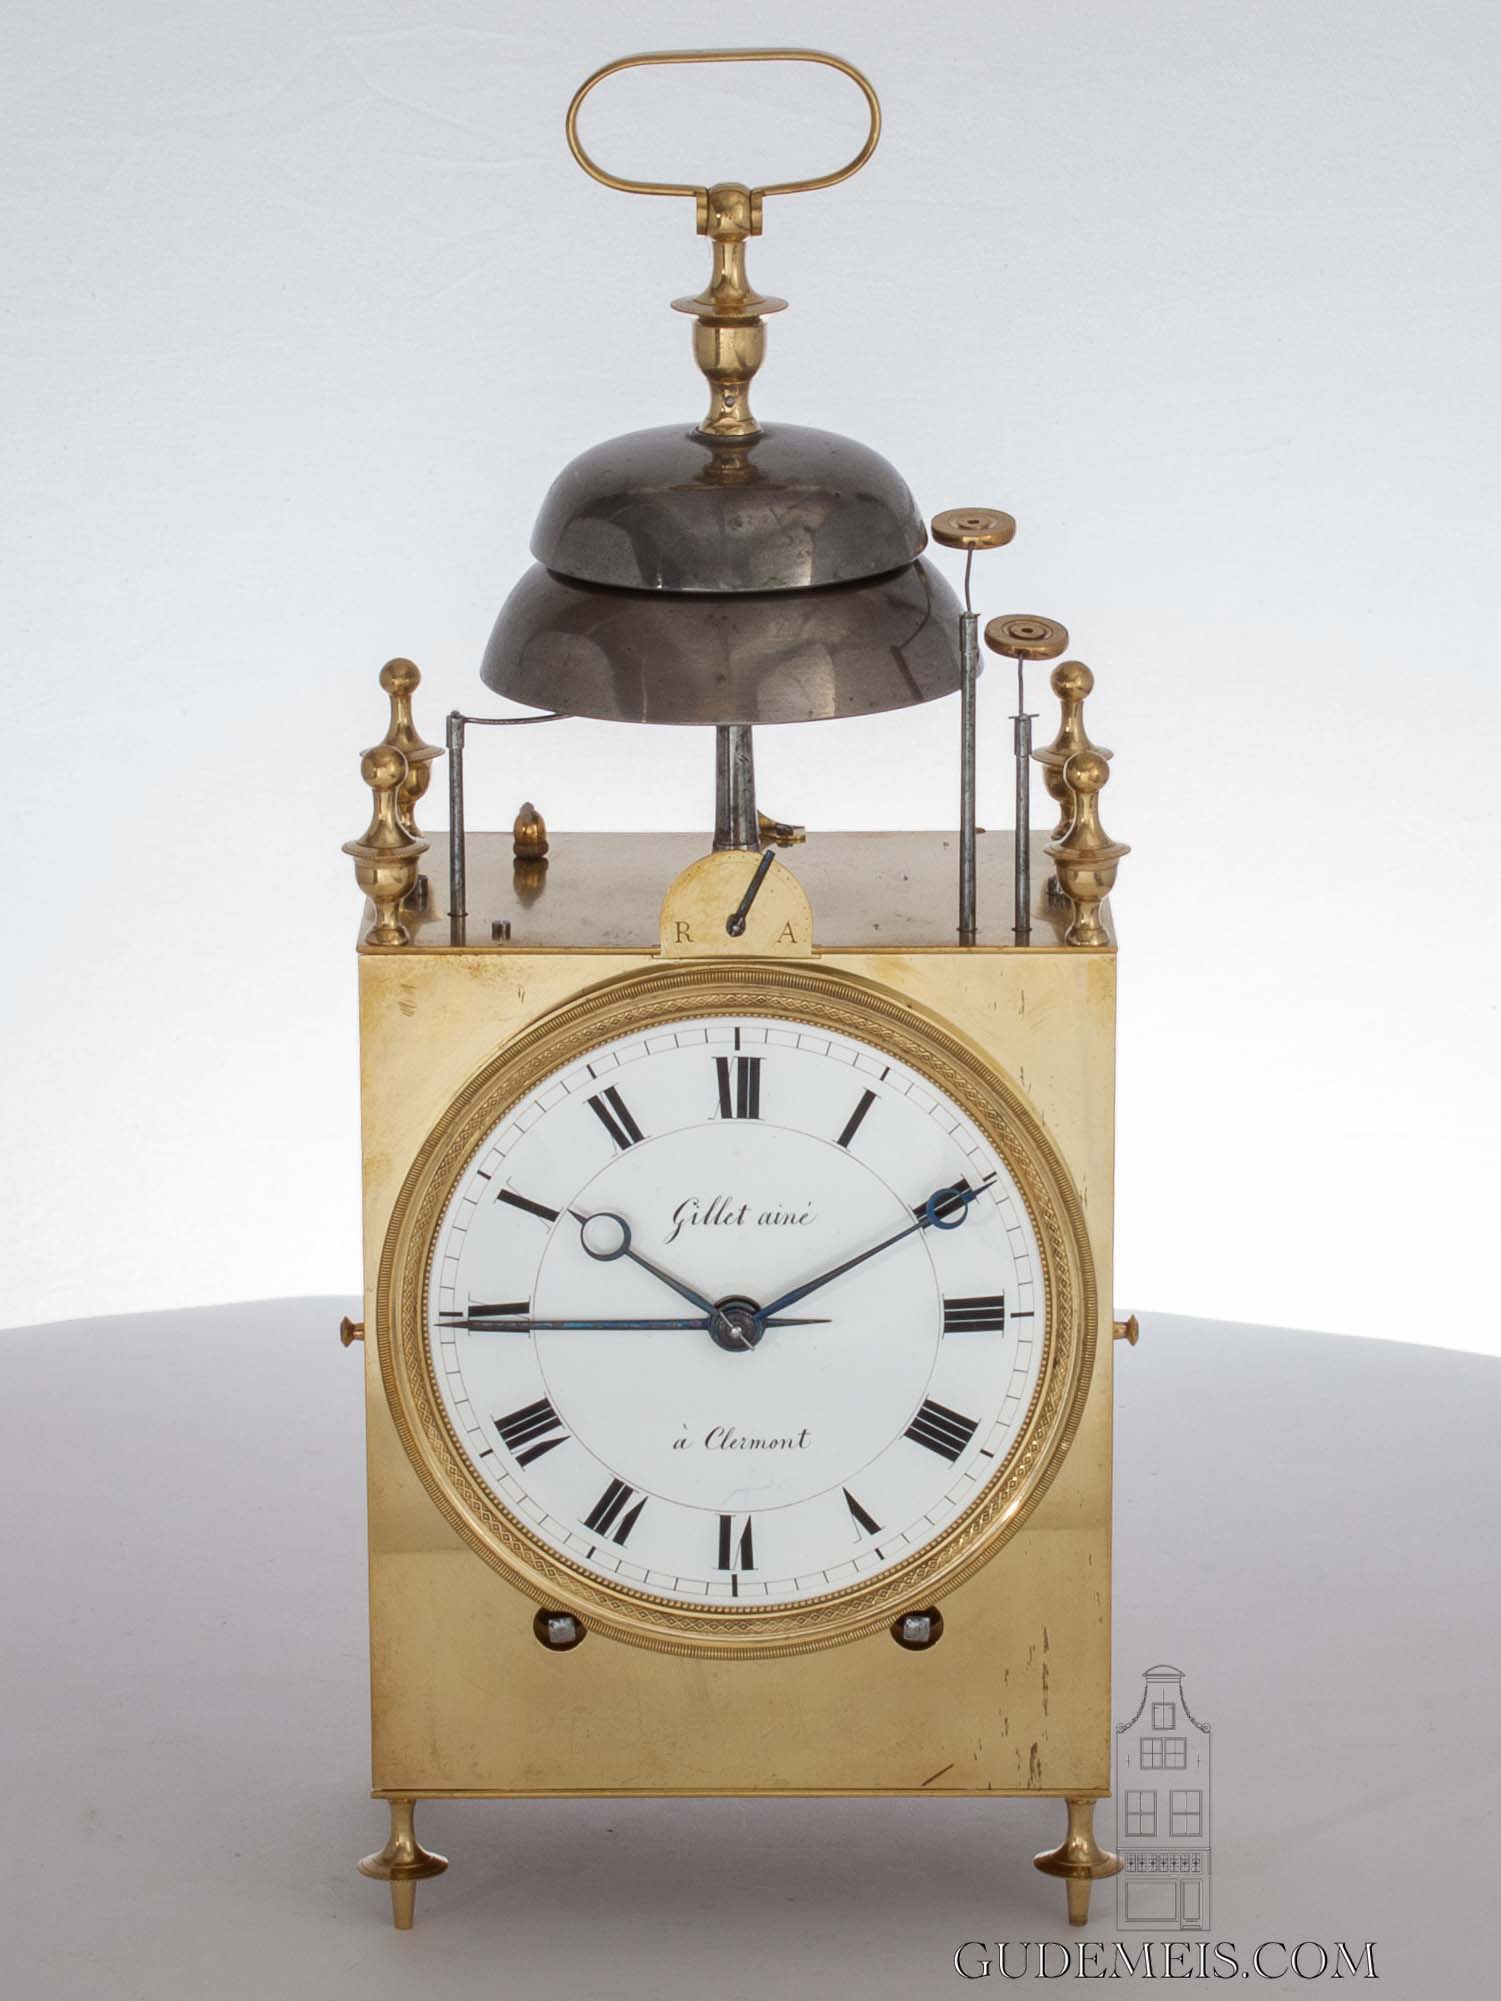 large-French-brass-oversized-quarter-striking-alarm-two-bells-gillet-aine-Clermont-antique-travel-clock-